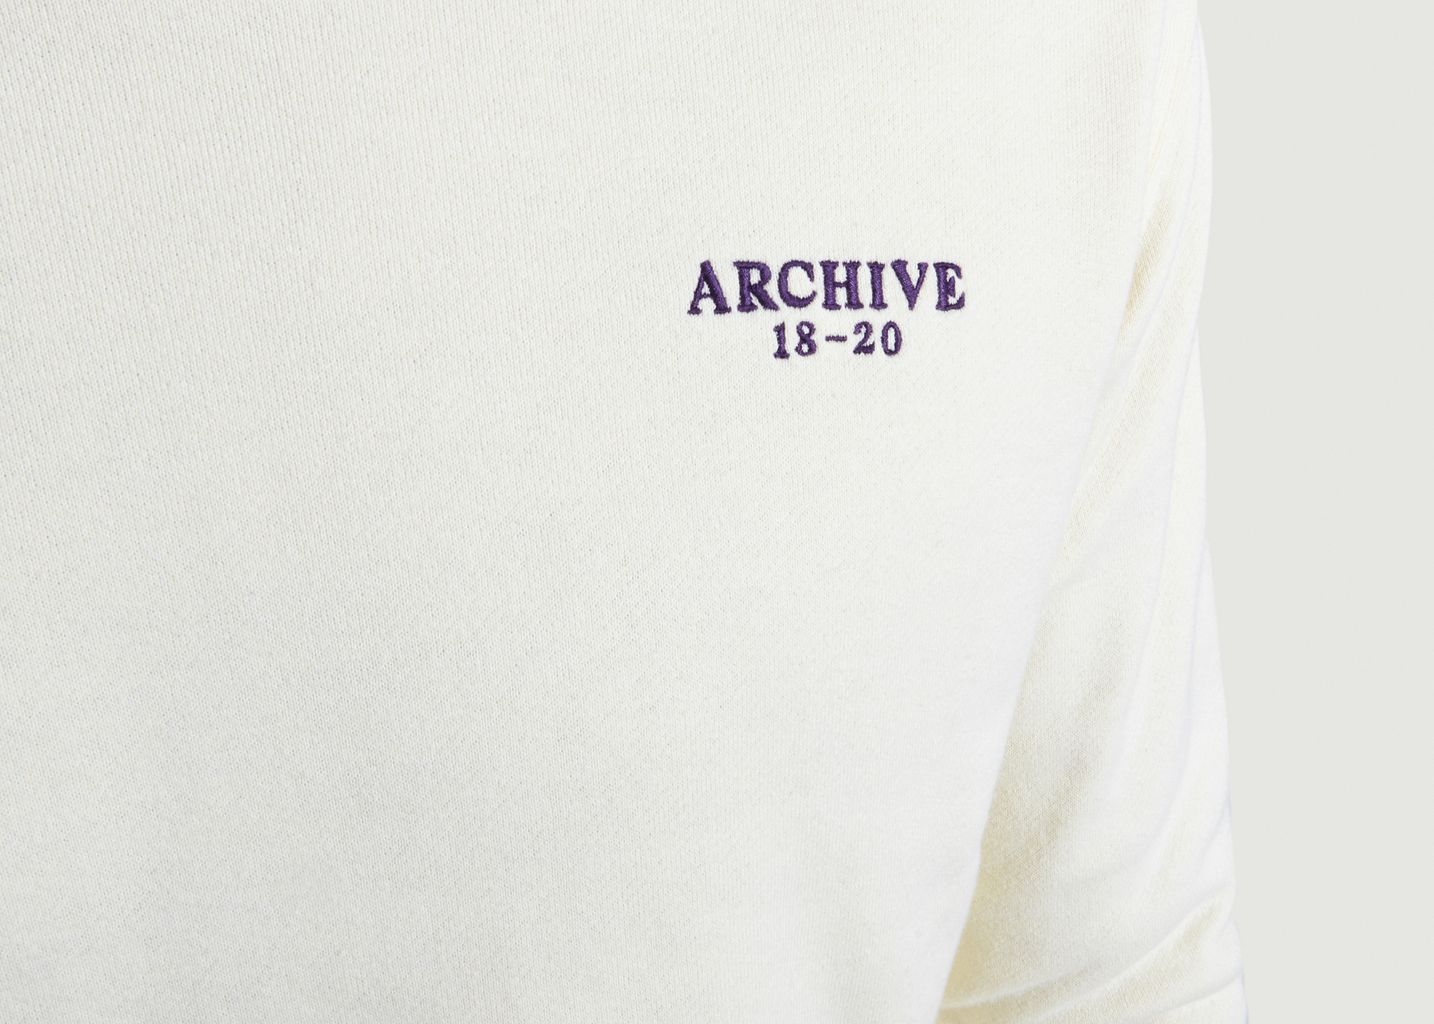 Sweat Broderie Archive - Archive 18-20